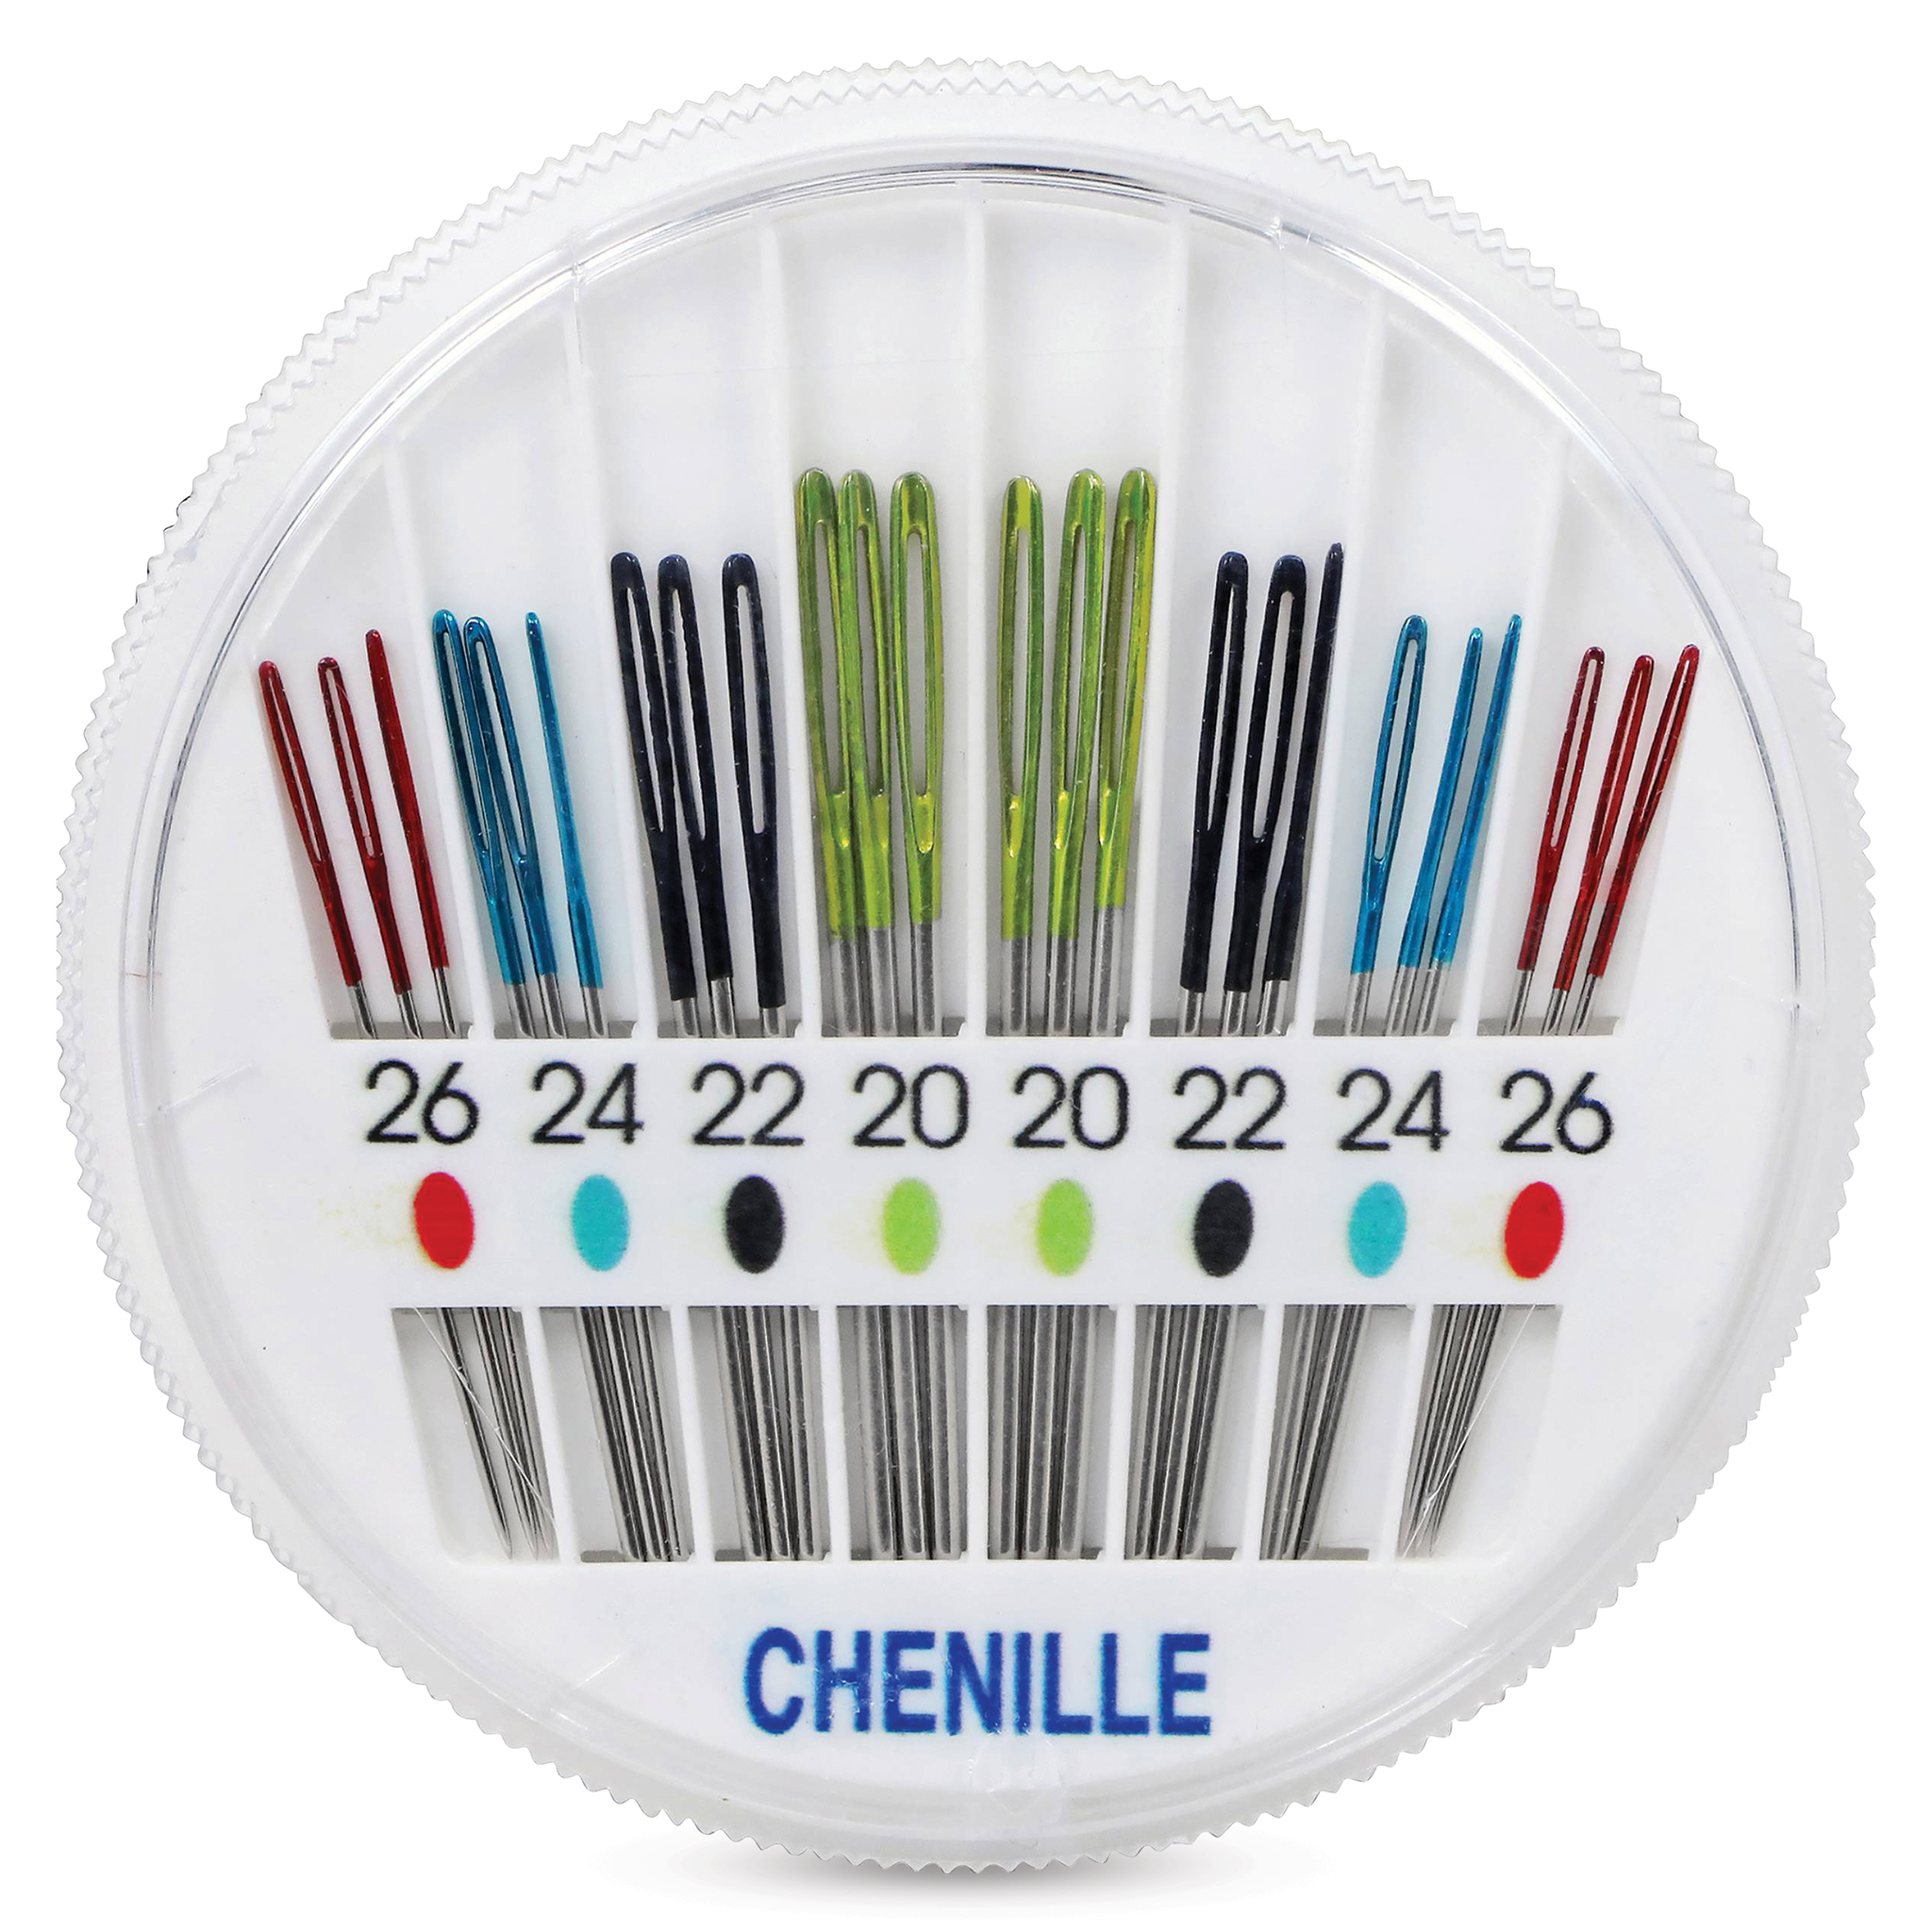 Guide to Tapestry and Chenille Needles